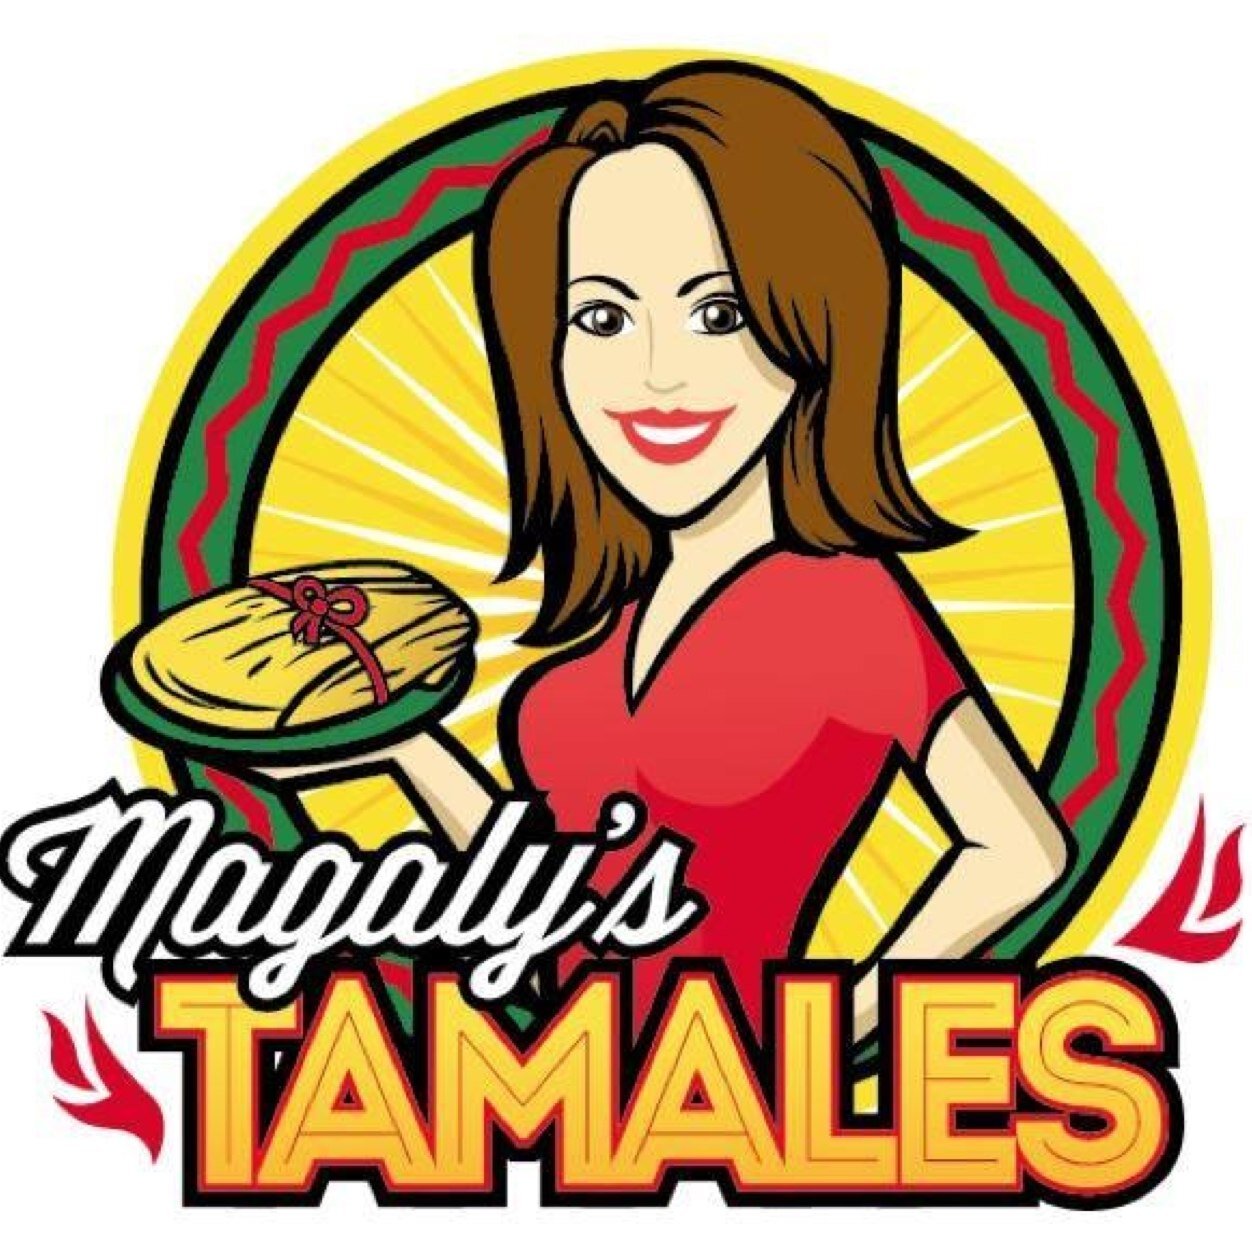 Specializing in Tamales & Premium Mexican Cuisine! We provide catering for parties and events. Soft tacos are made with hand made tortillas!